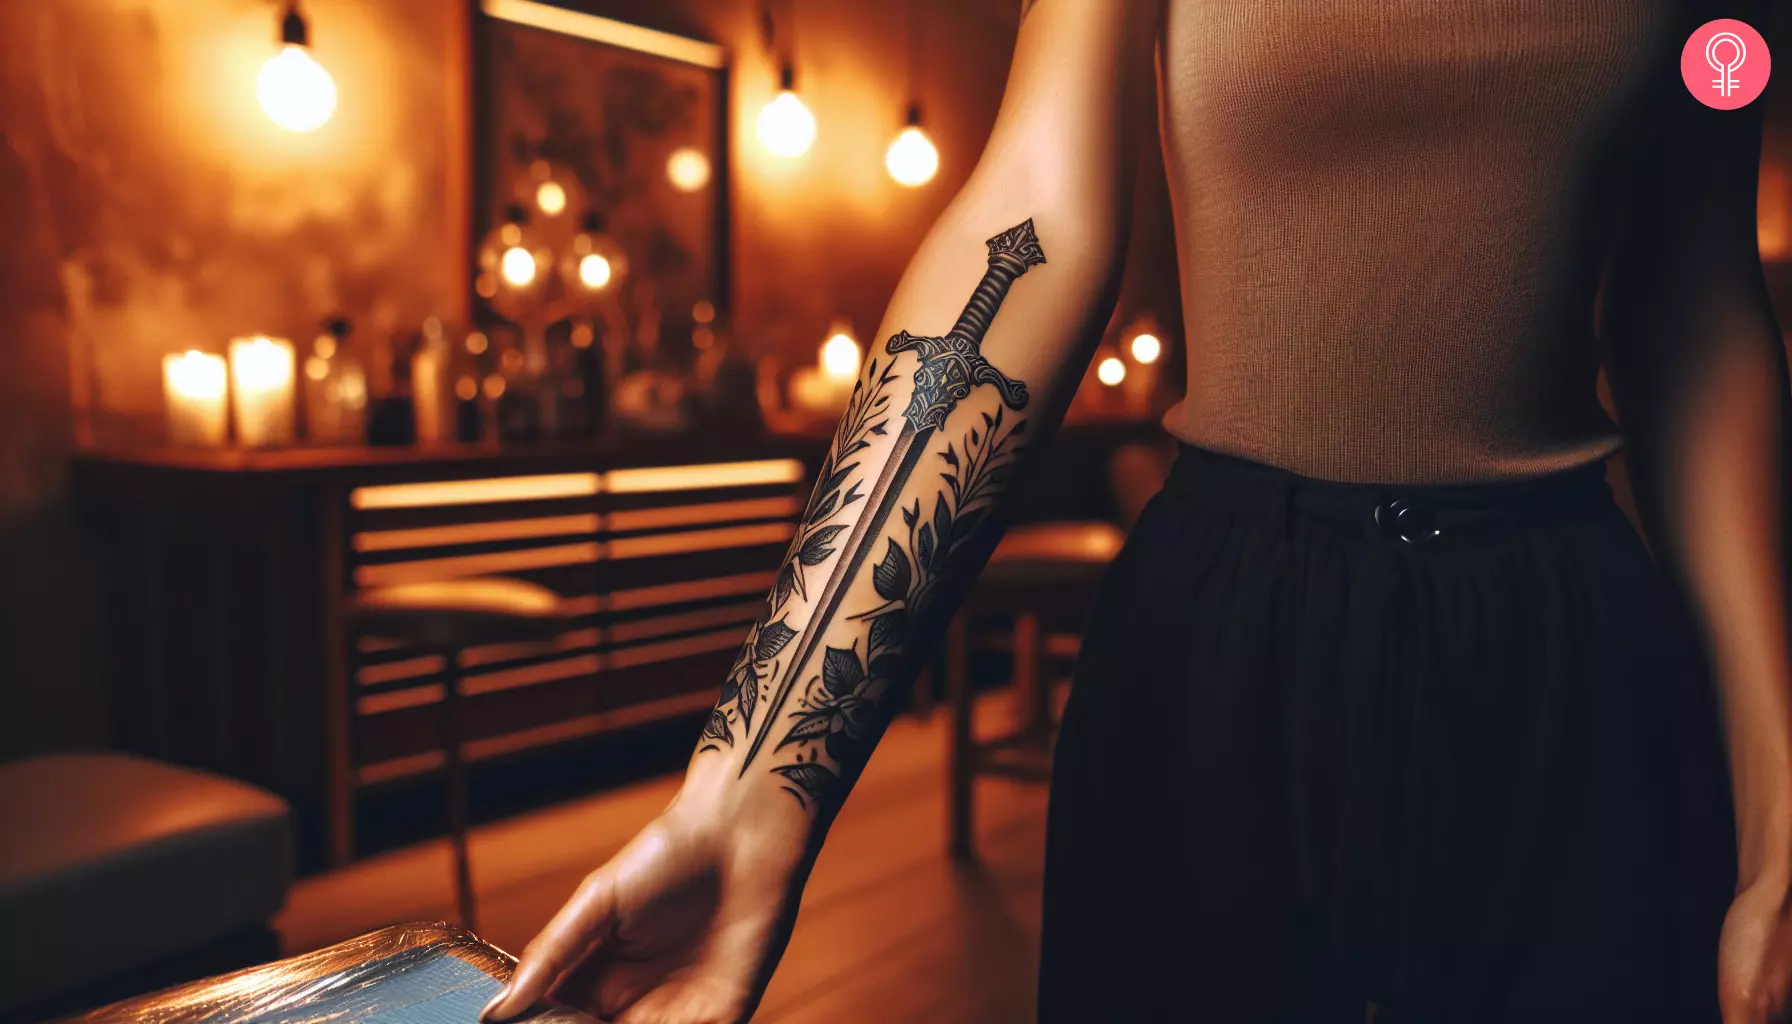 A sword tattoo design on the forearm of a woman